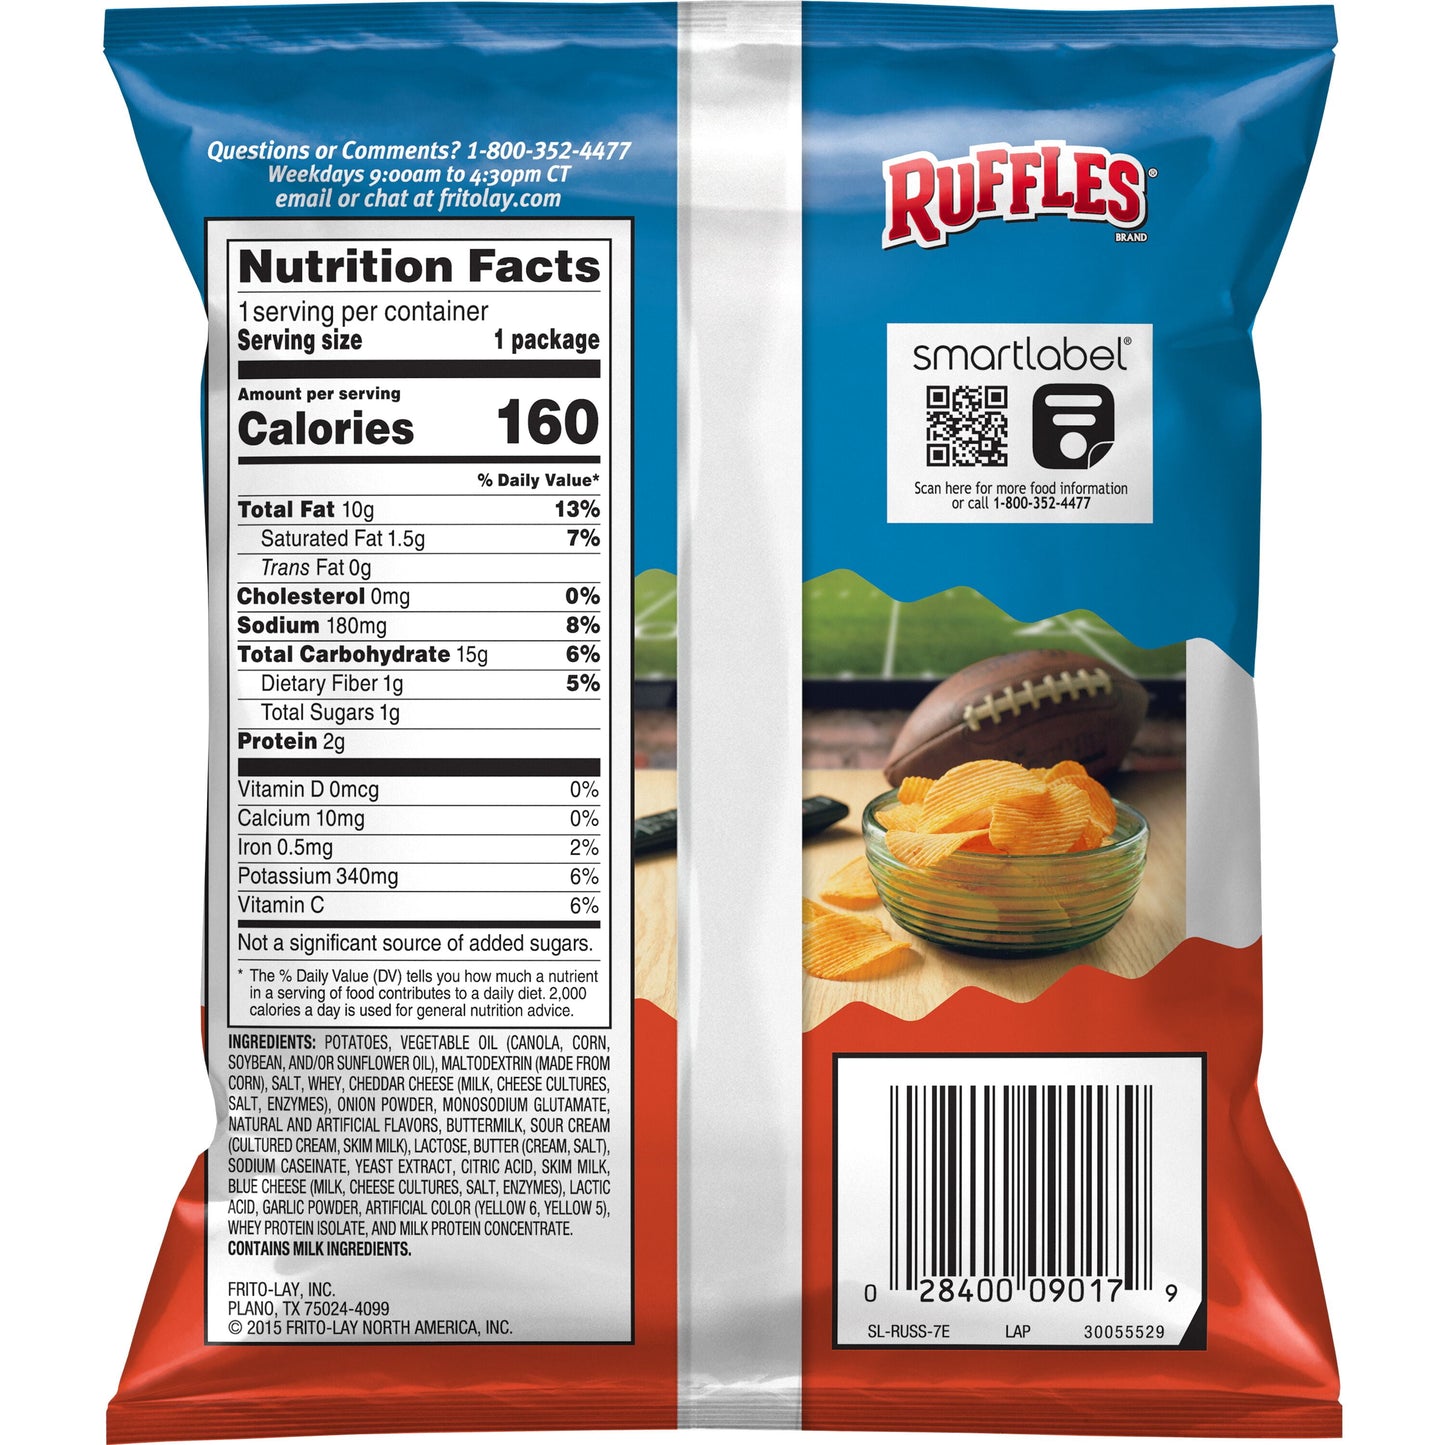 Ruffles Potato Chips Cheddar & Sour Cream Flavored Snack Chips, 1 oz Bag